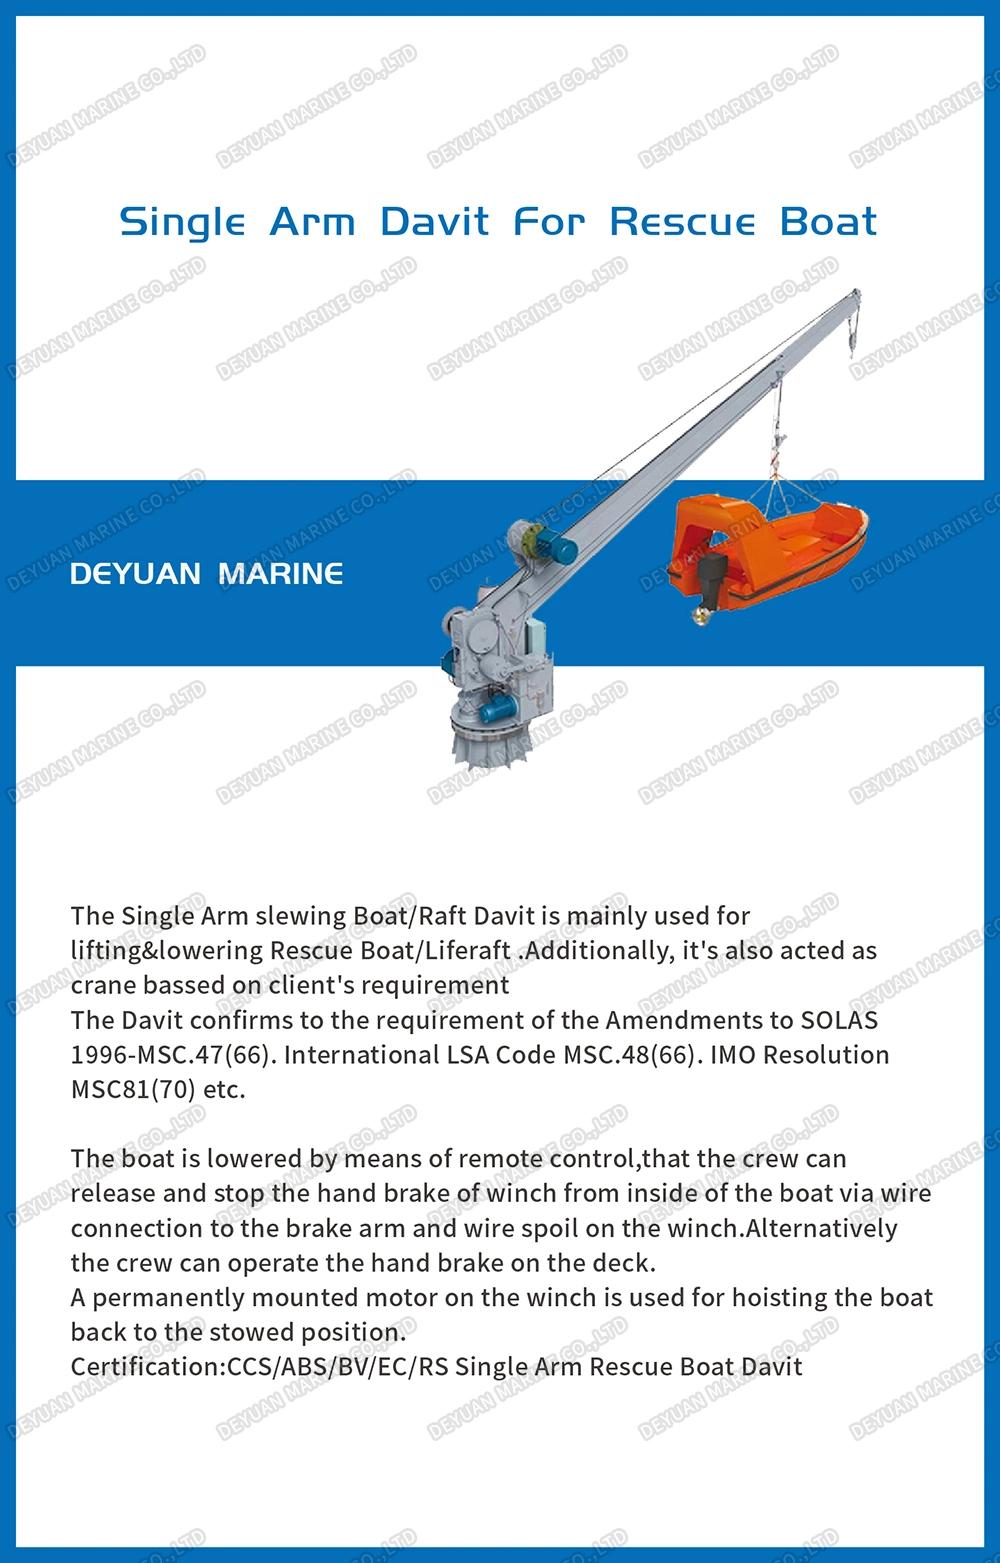 23kn Solas Single Arm Slewing Davit for Rescue Boat